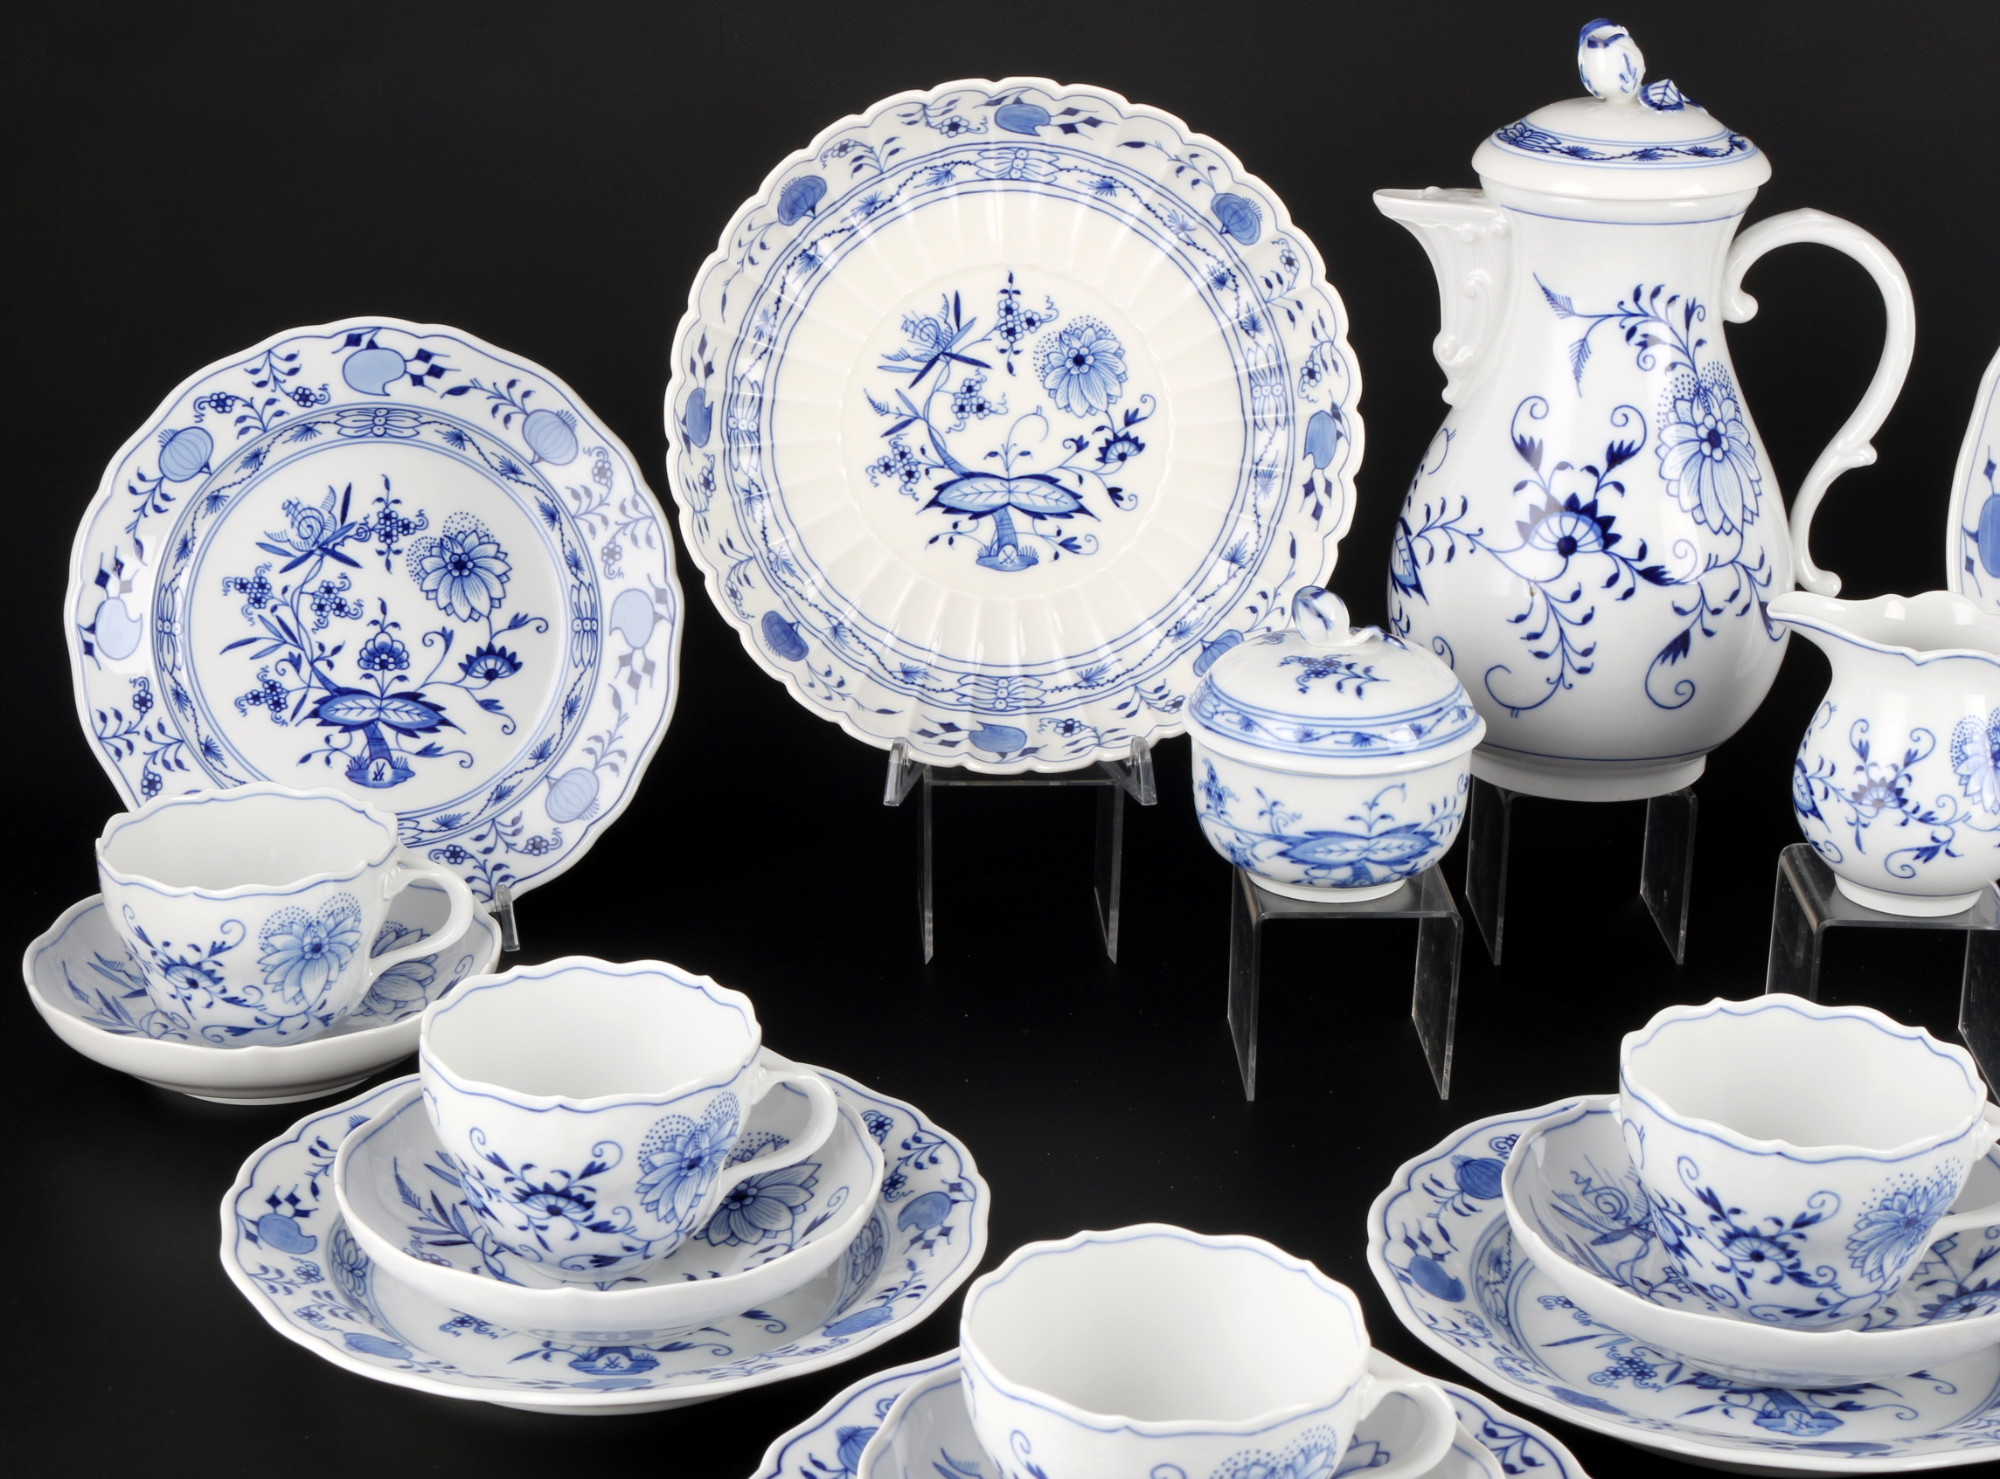 Meissen Onion Pattern coffee service for 7 persons 1st choice, Kaffeeservice für 7 Personen 1.Wahl, - Image 2 of 6